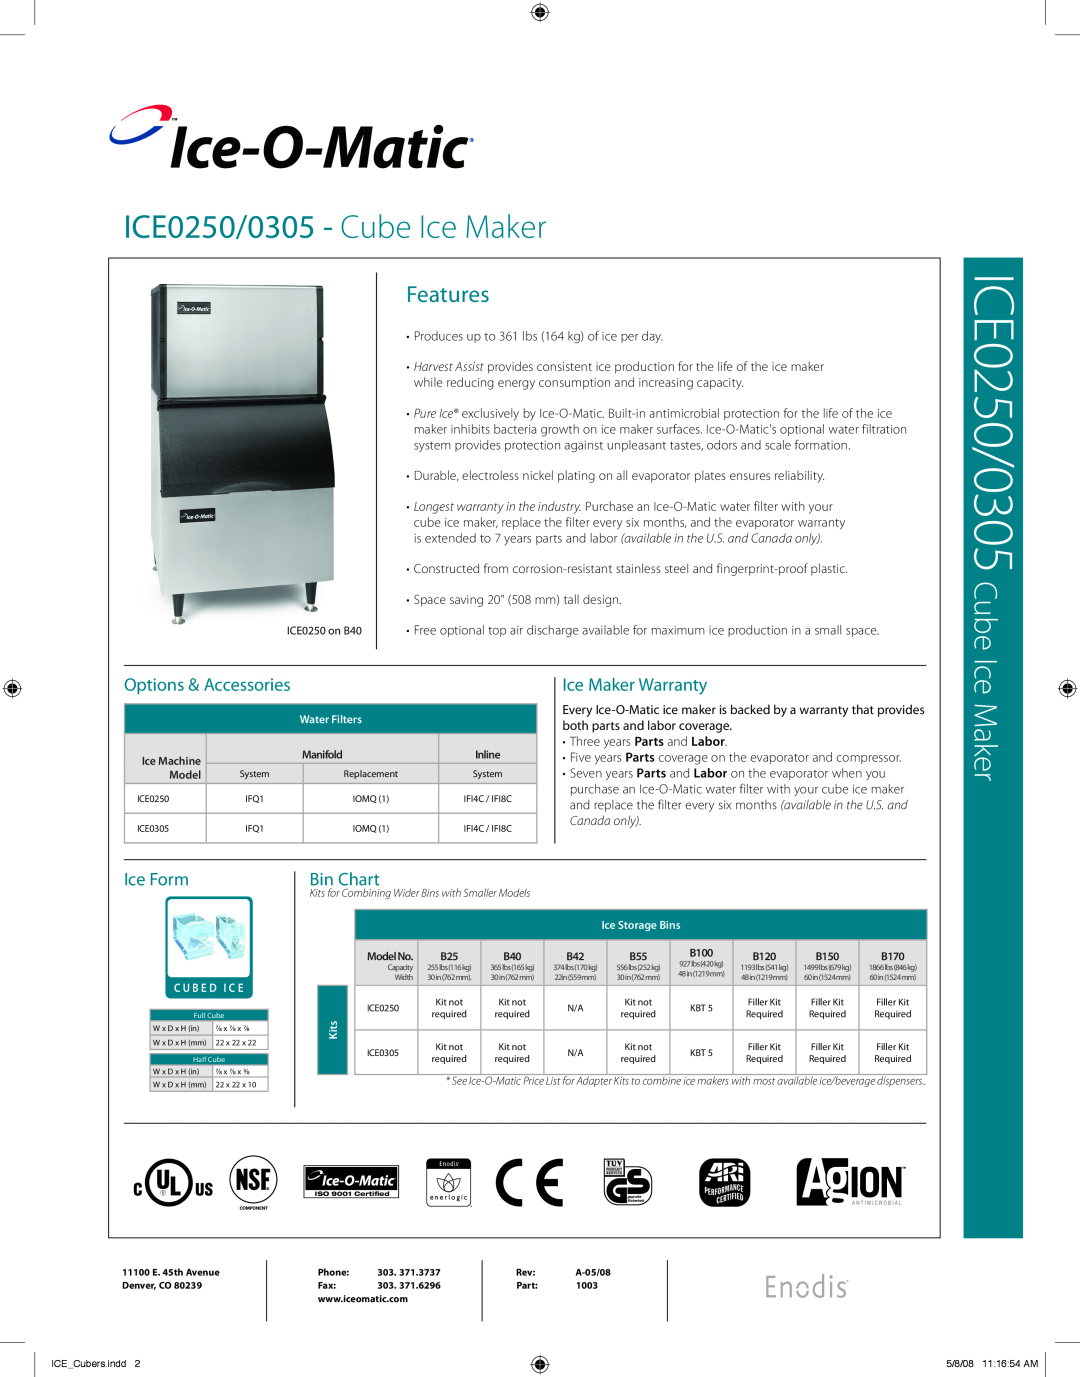 Ice-O-Matic ICE0305 warranty Ice-O-Matic, Options & Accessories, Ice Maker Warranty, Ice Form, Bin Chart, Features 